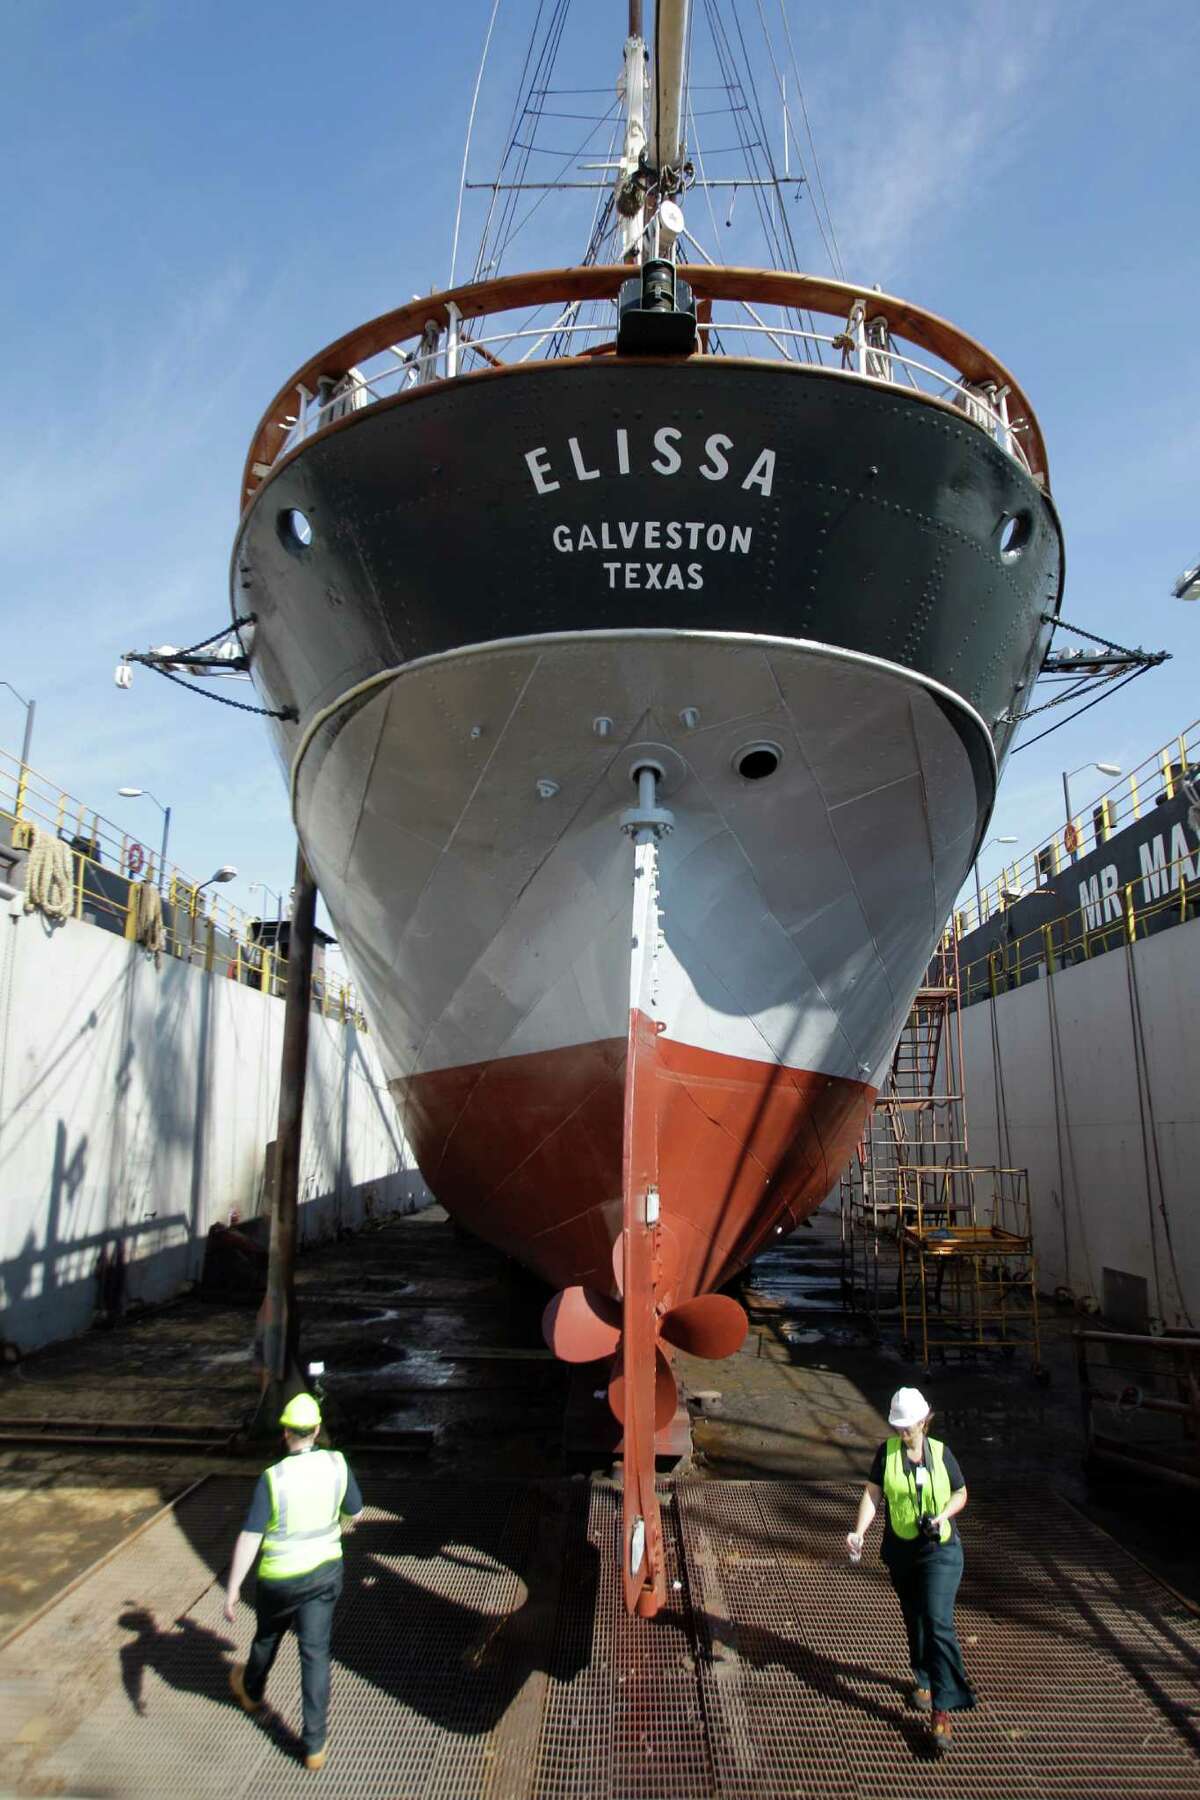 The Official Tall Ship of Texas, the Elissa, will return to Galveston waters for a limited daysailing series in April 2020.